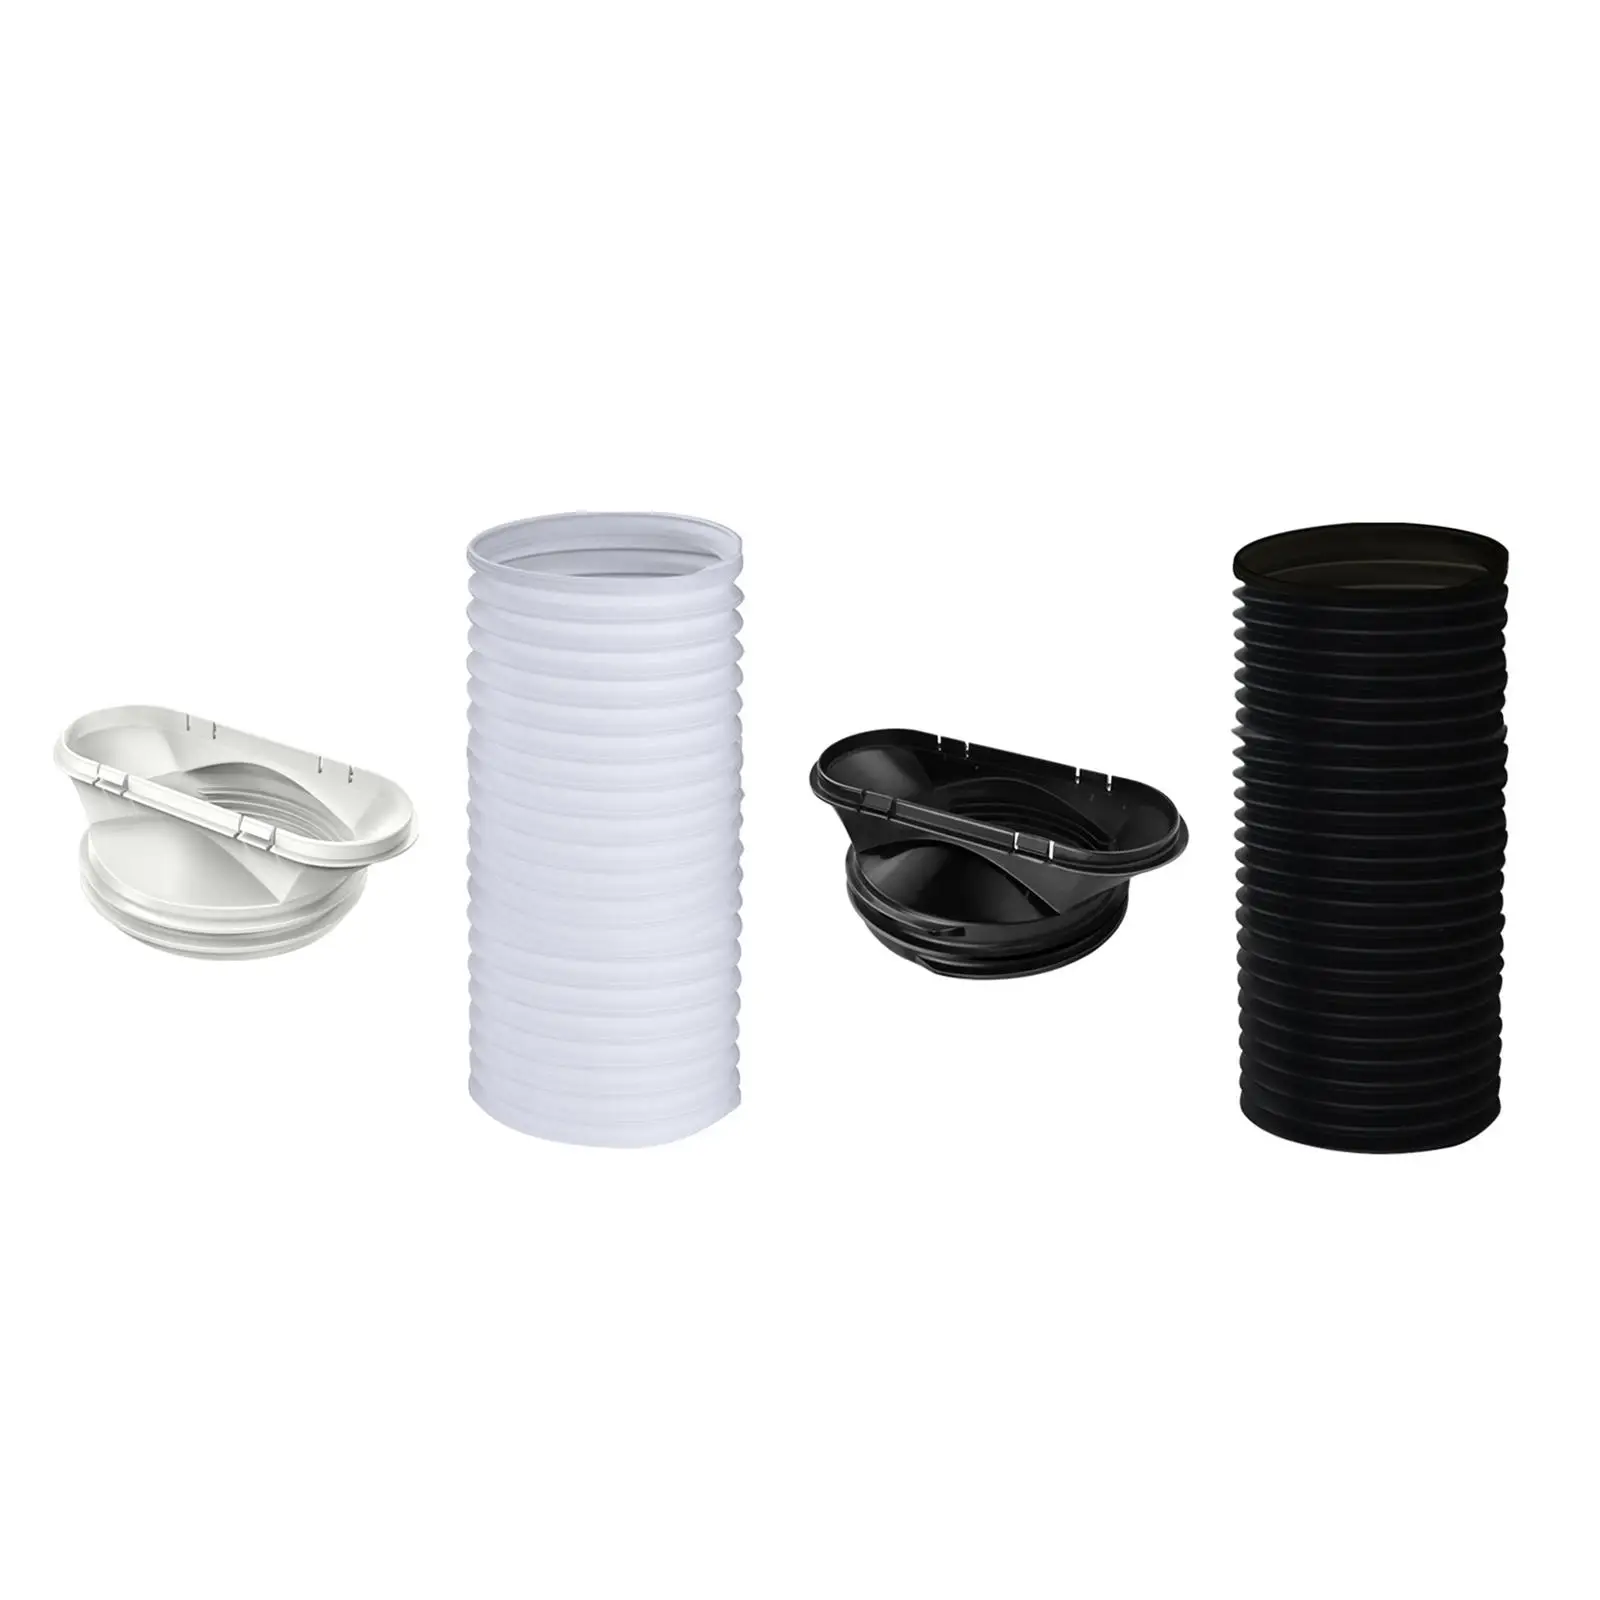 AC Vent Hose and Connector Universal Equipment for Portable Air Conditioner